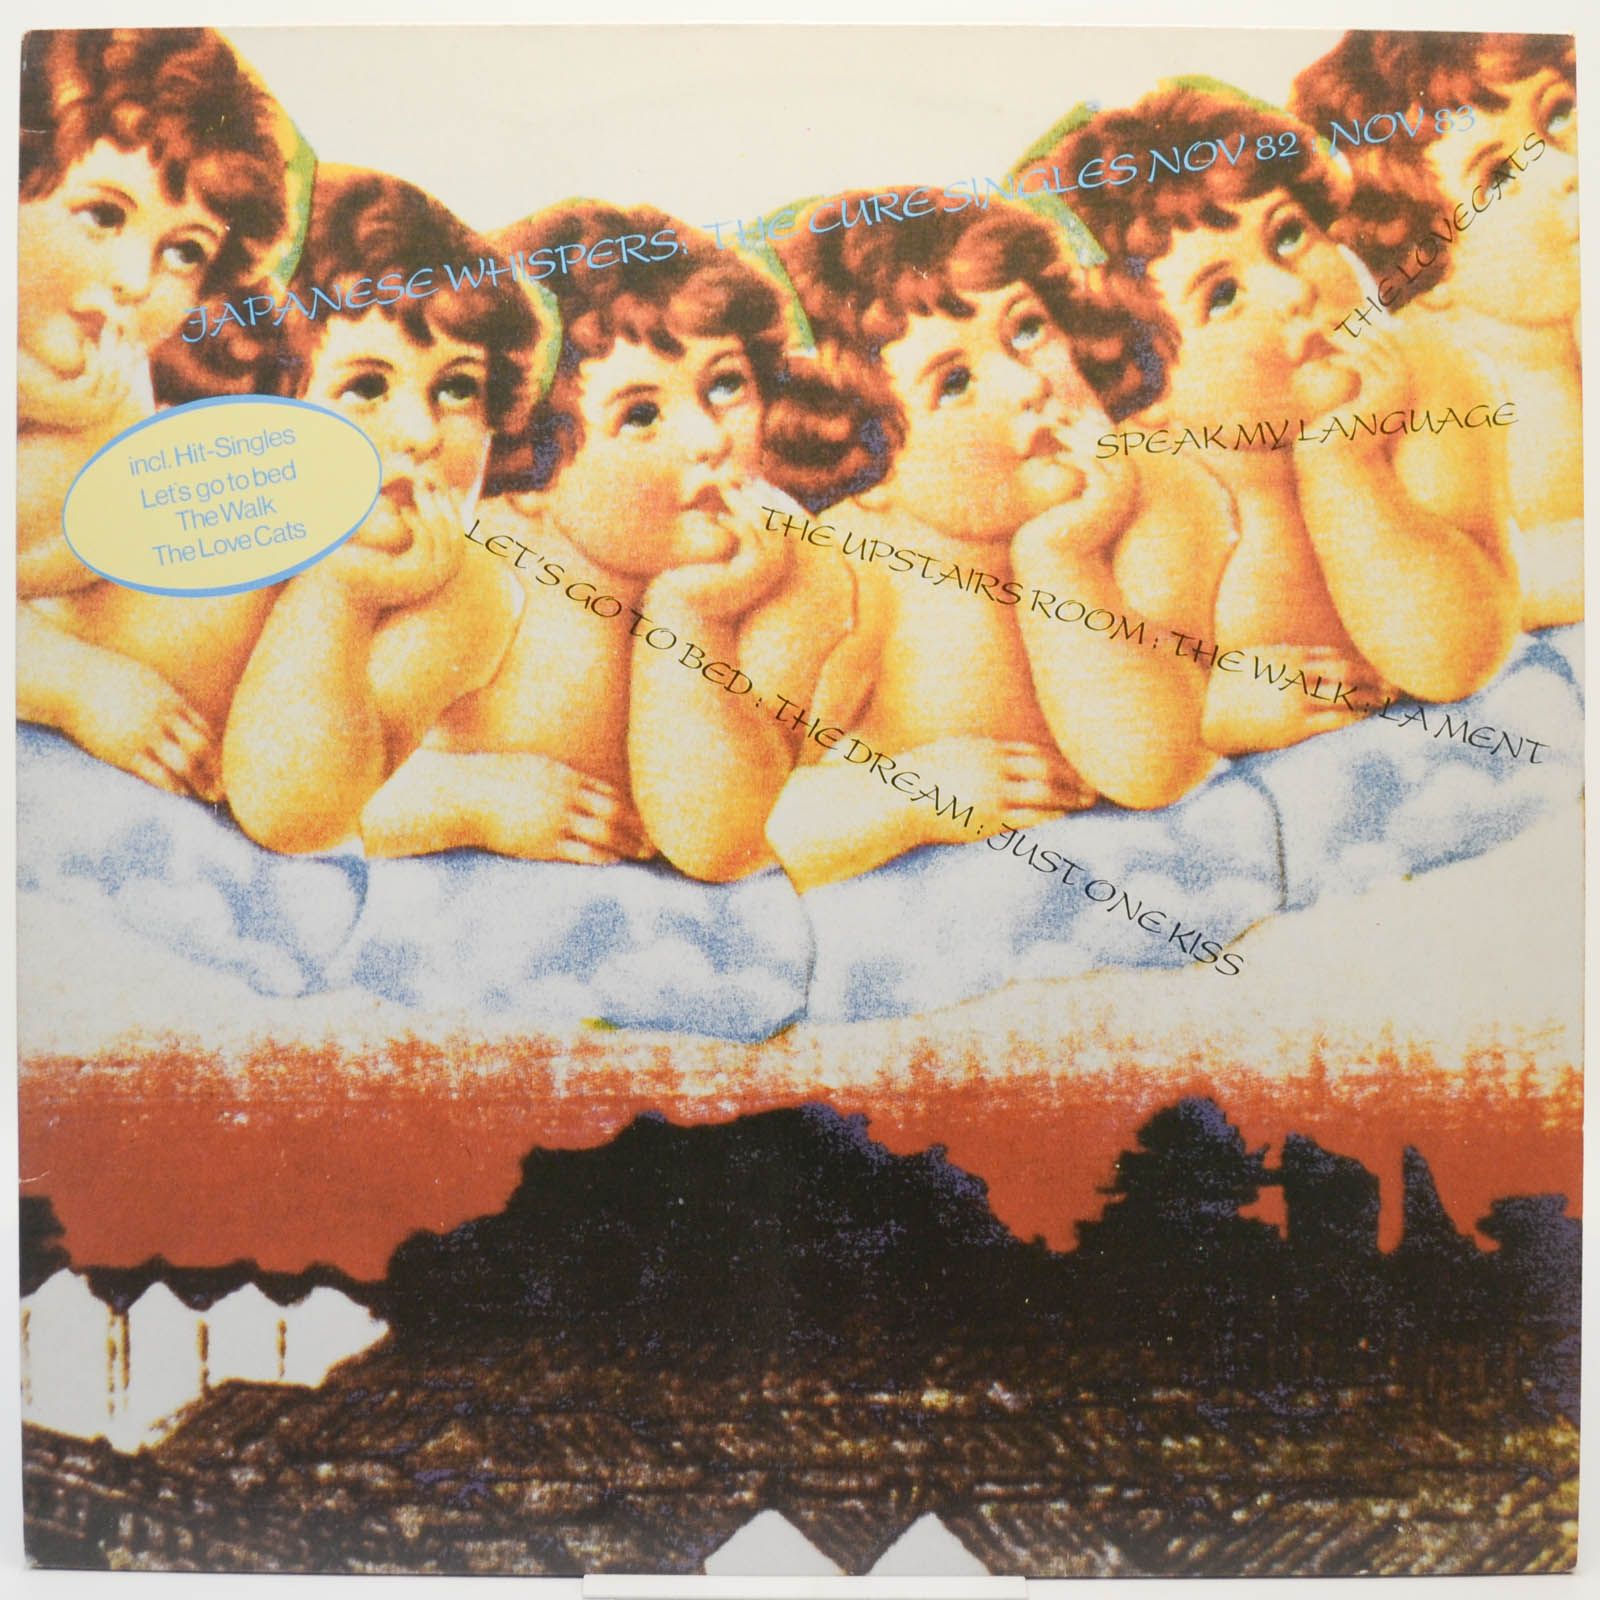 Cure — Japanese Whispers, 1983